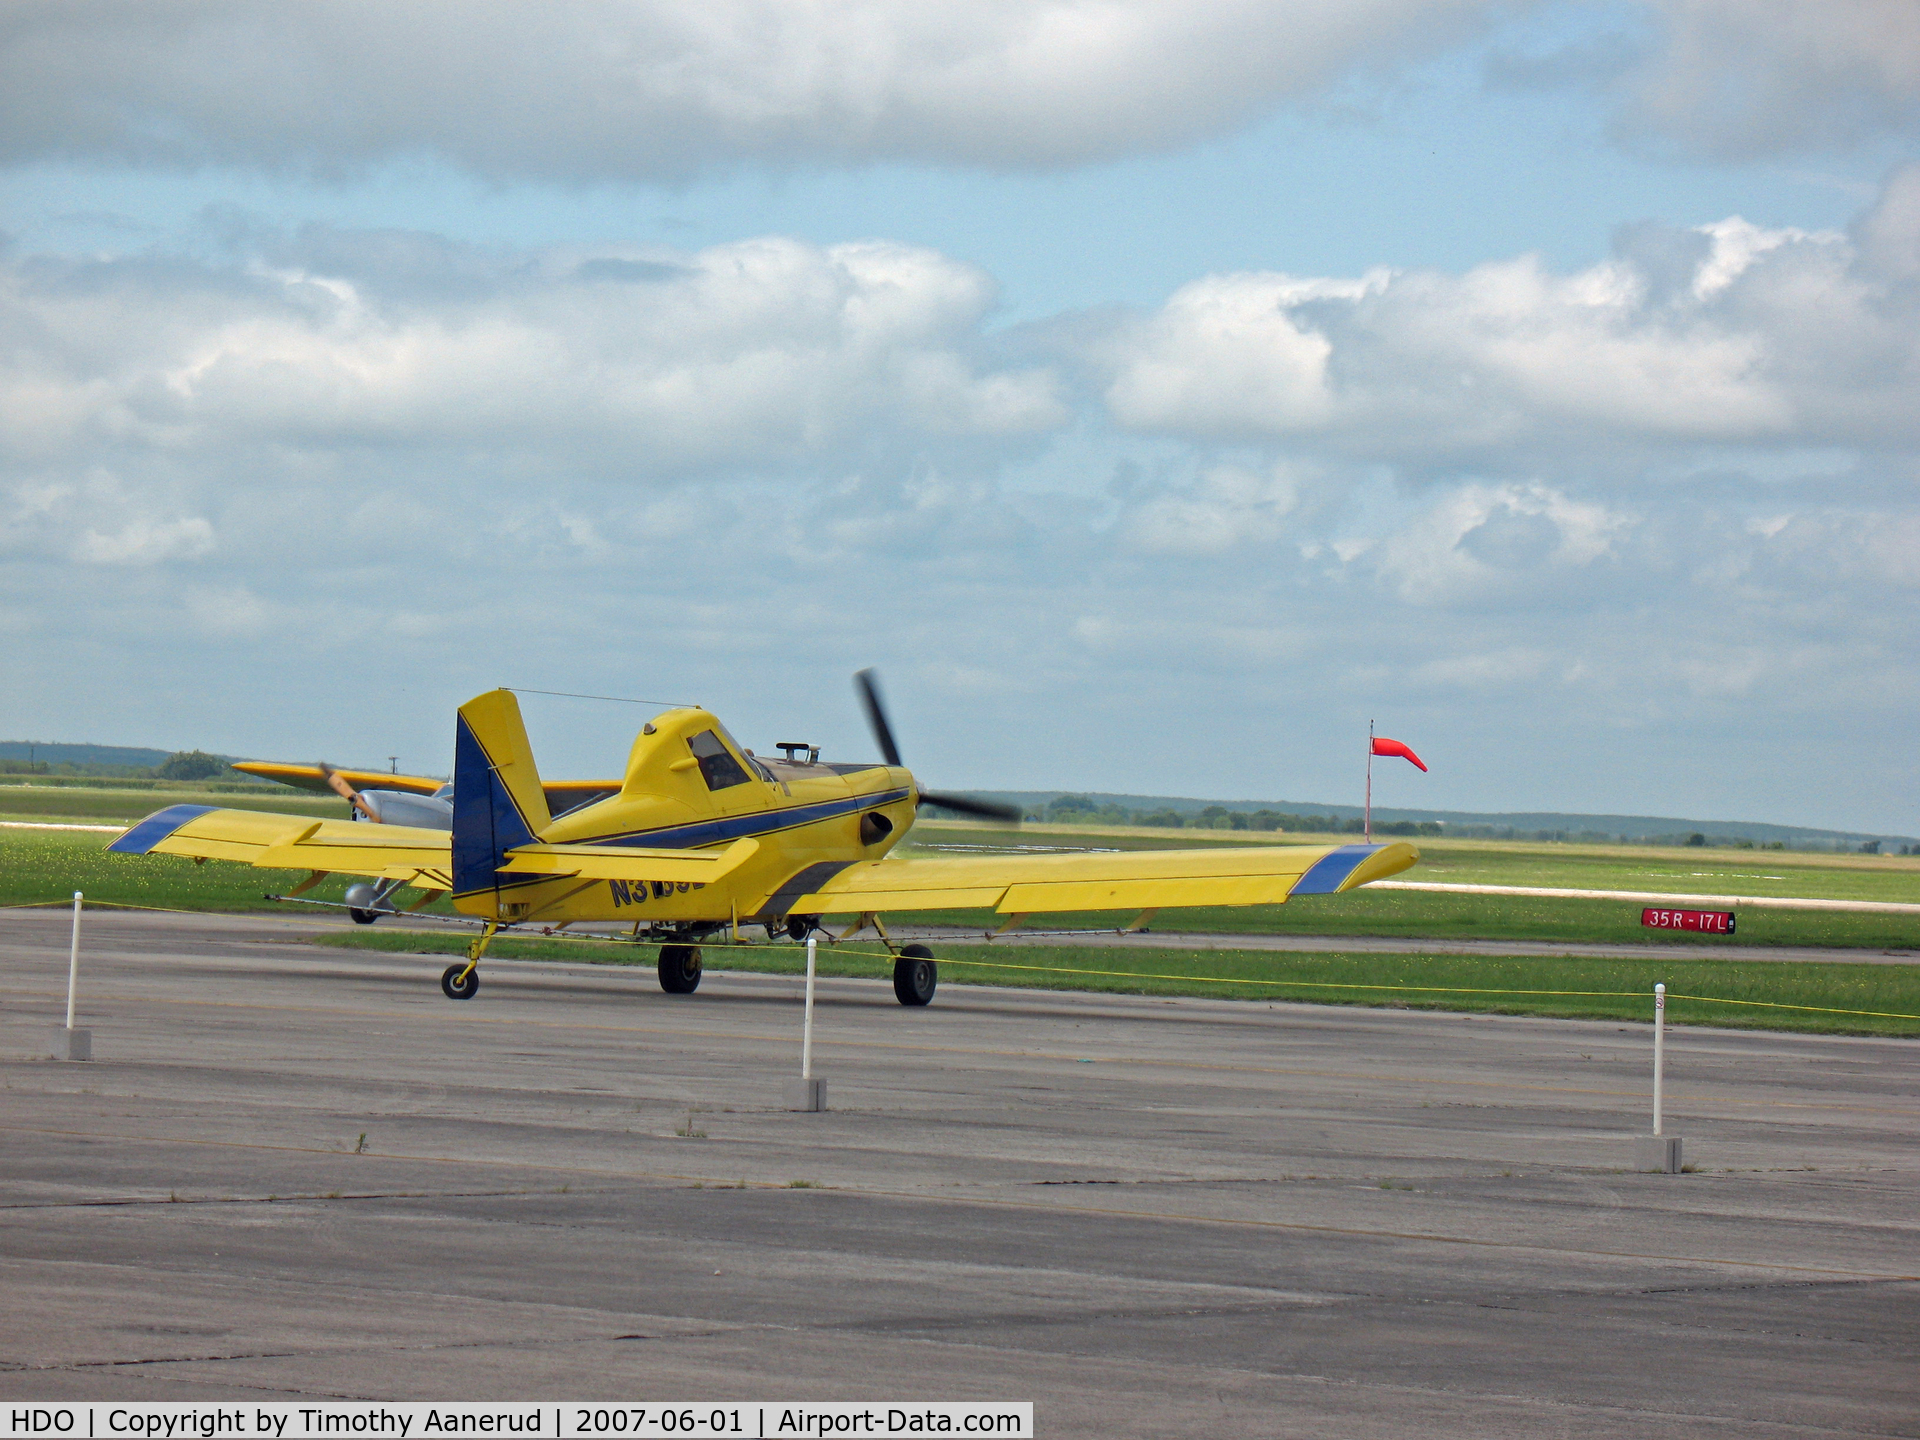 South Texas Regional At Hondo Airport (HDO) - The EAA Texas Fly-In, Ag spray plane departing